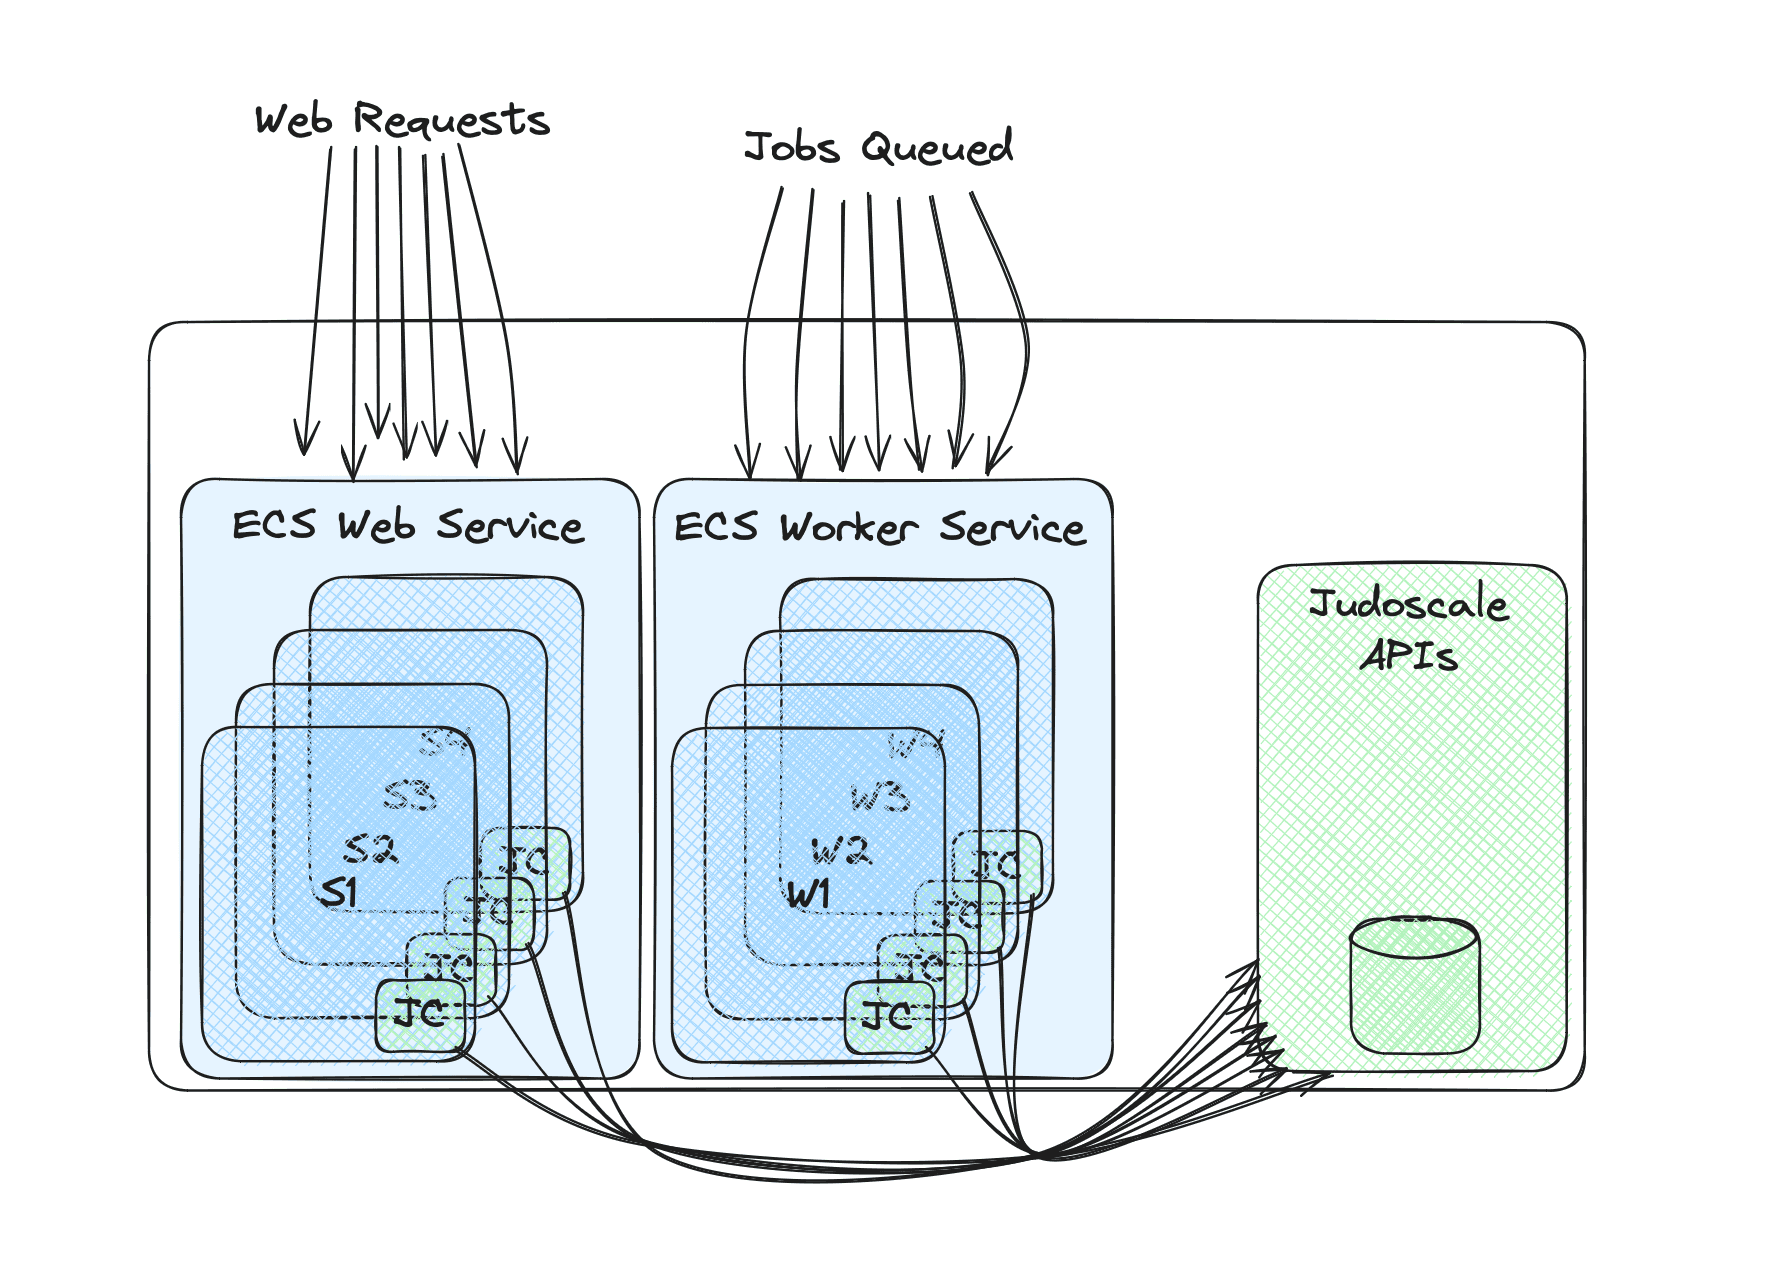 The prior diagram but with indicators added to show a Judoscale Adapter running on each Task instance with a Service